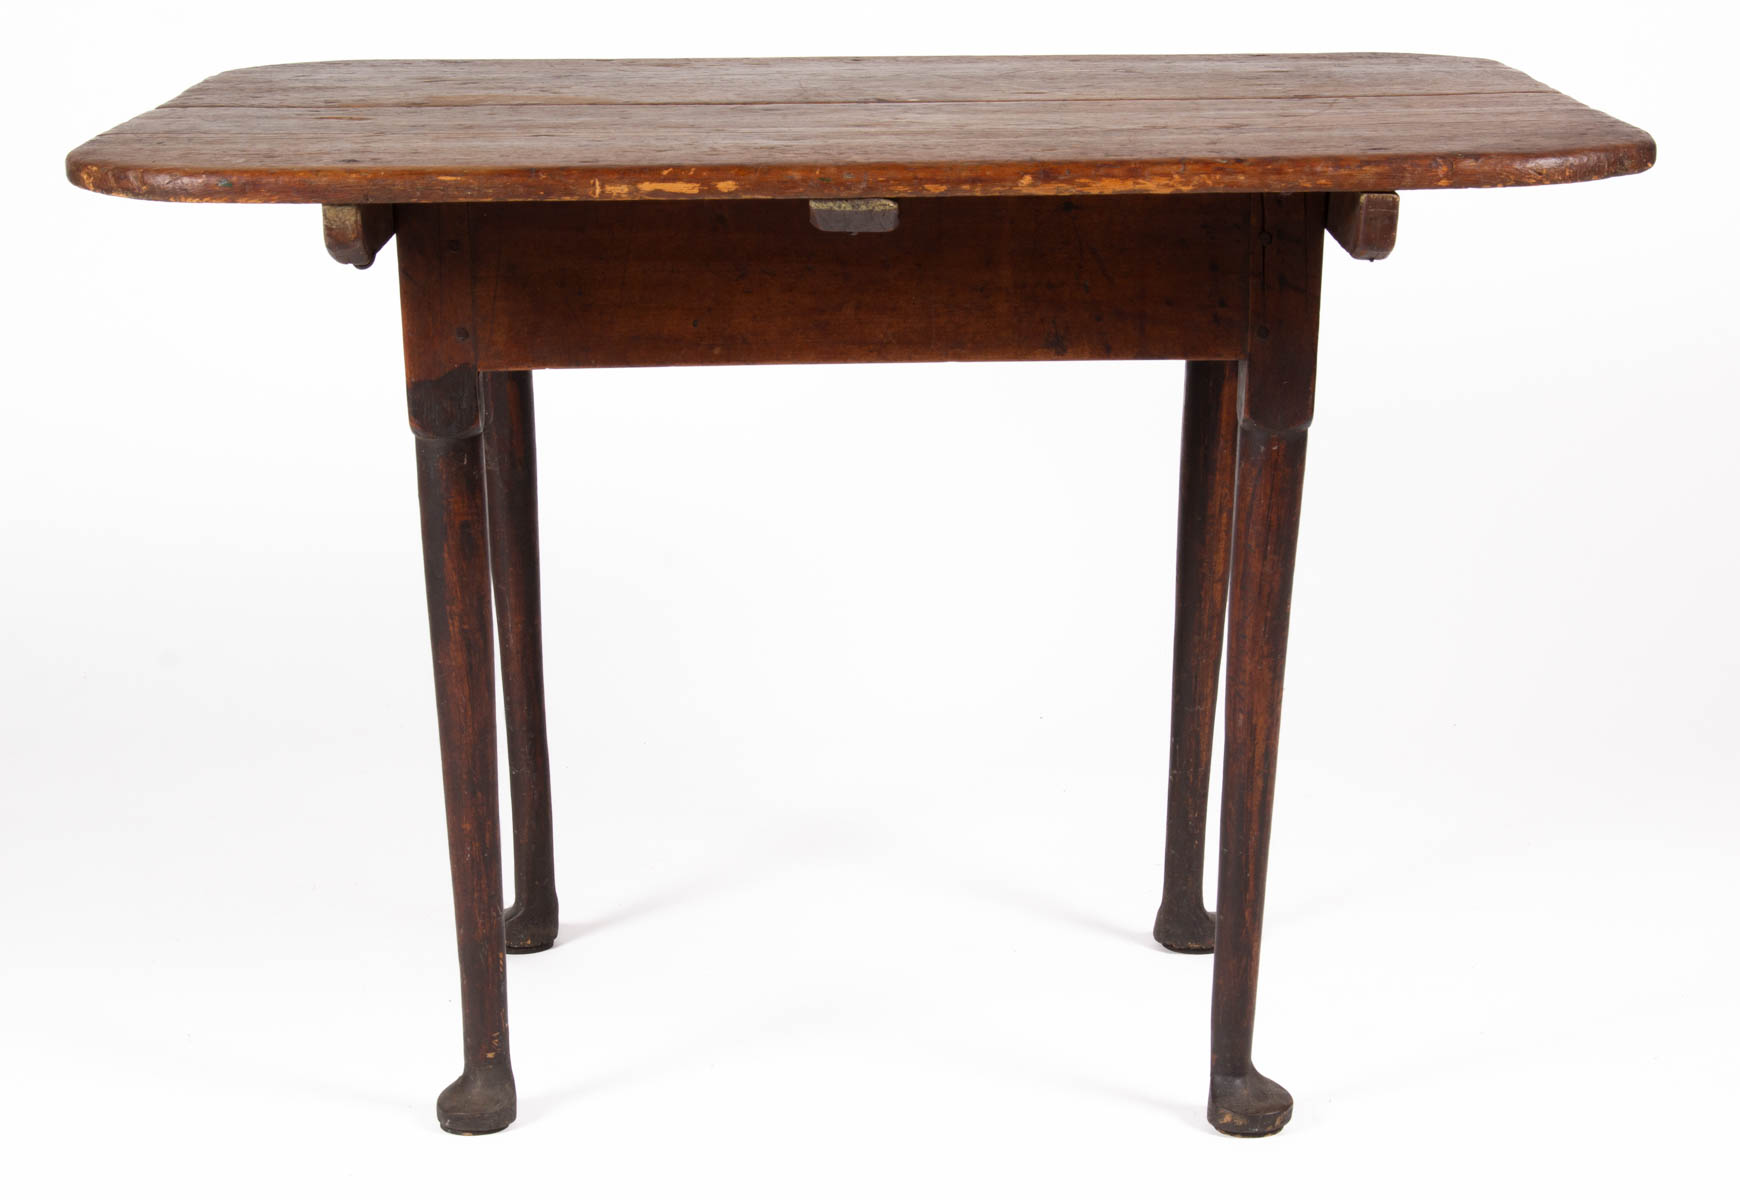 NEW ENGLAND QUEEN ANNE PINE TAVERN / WORK TABLE